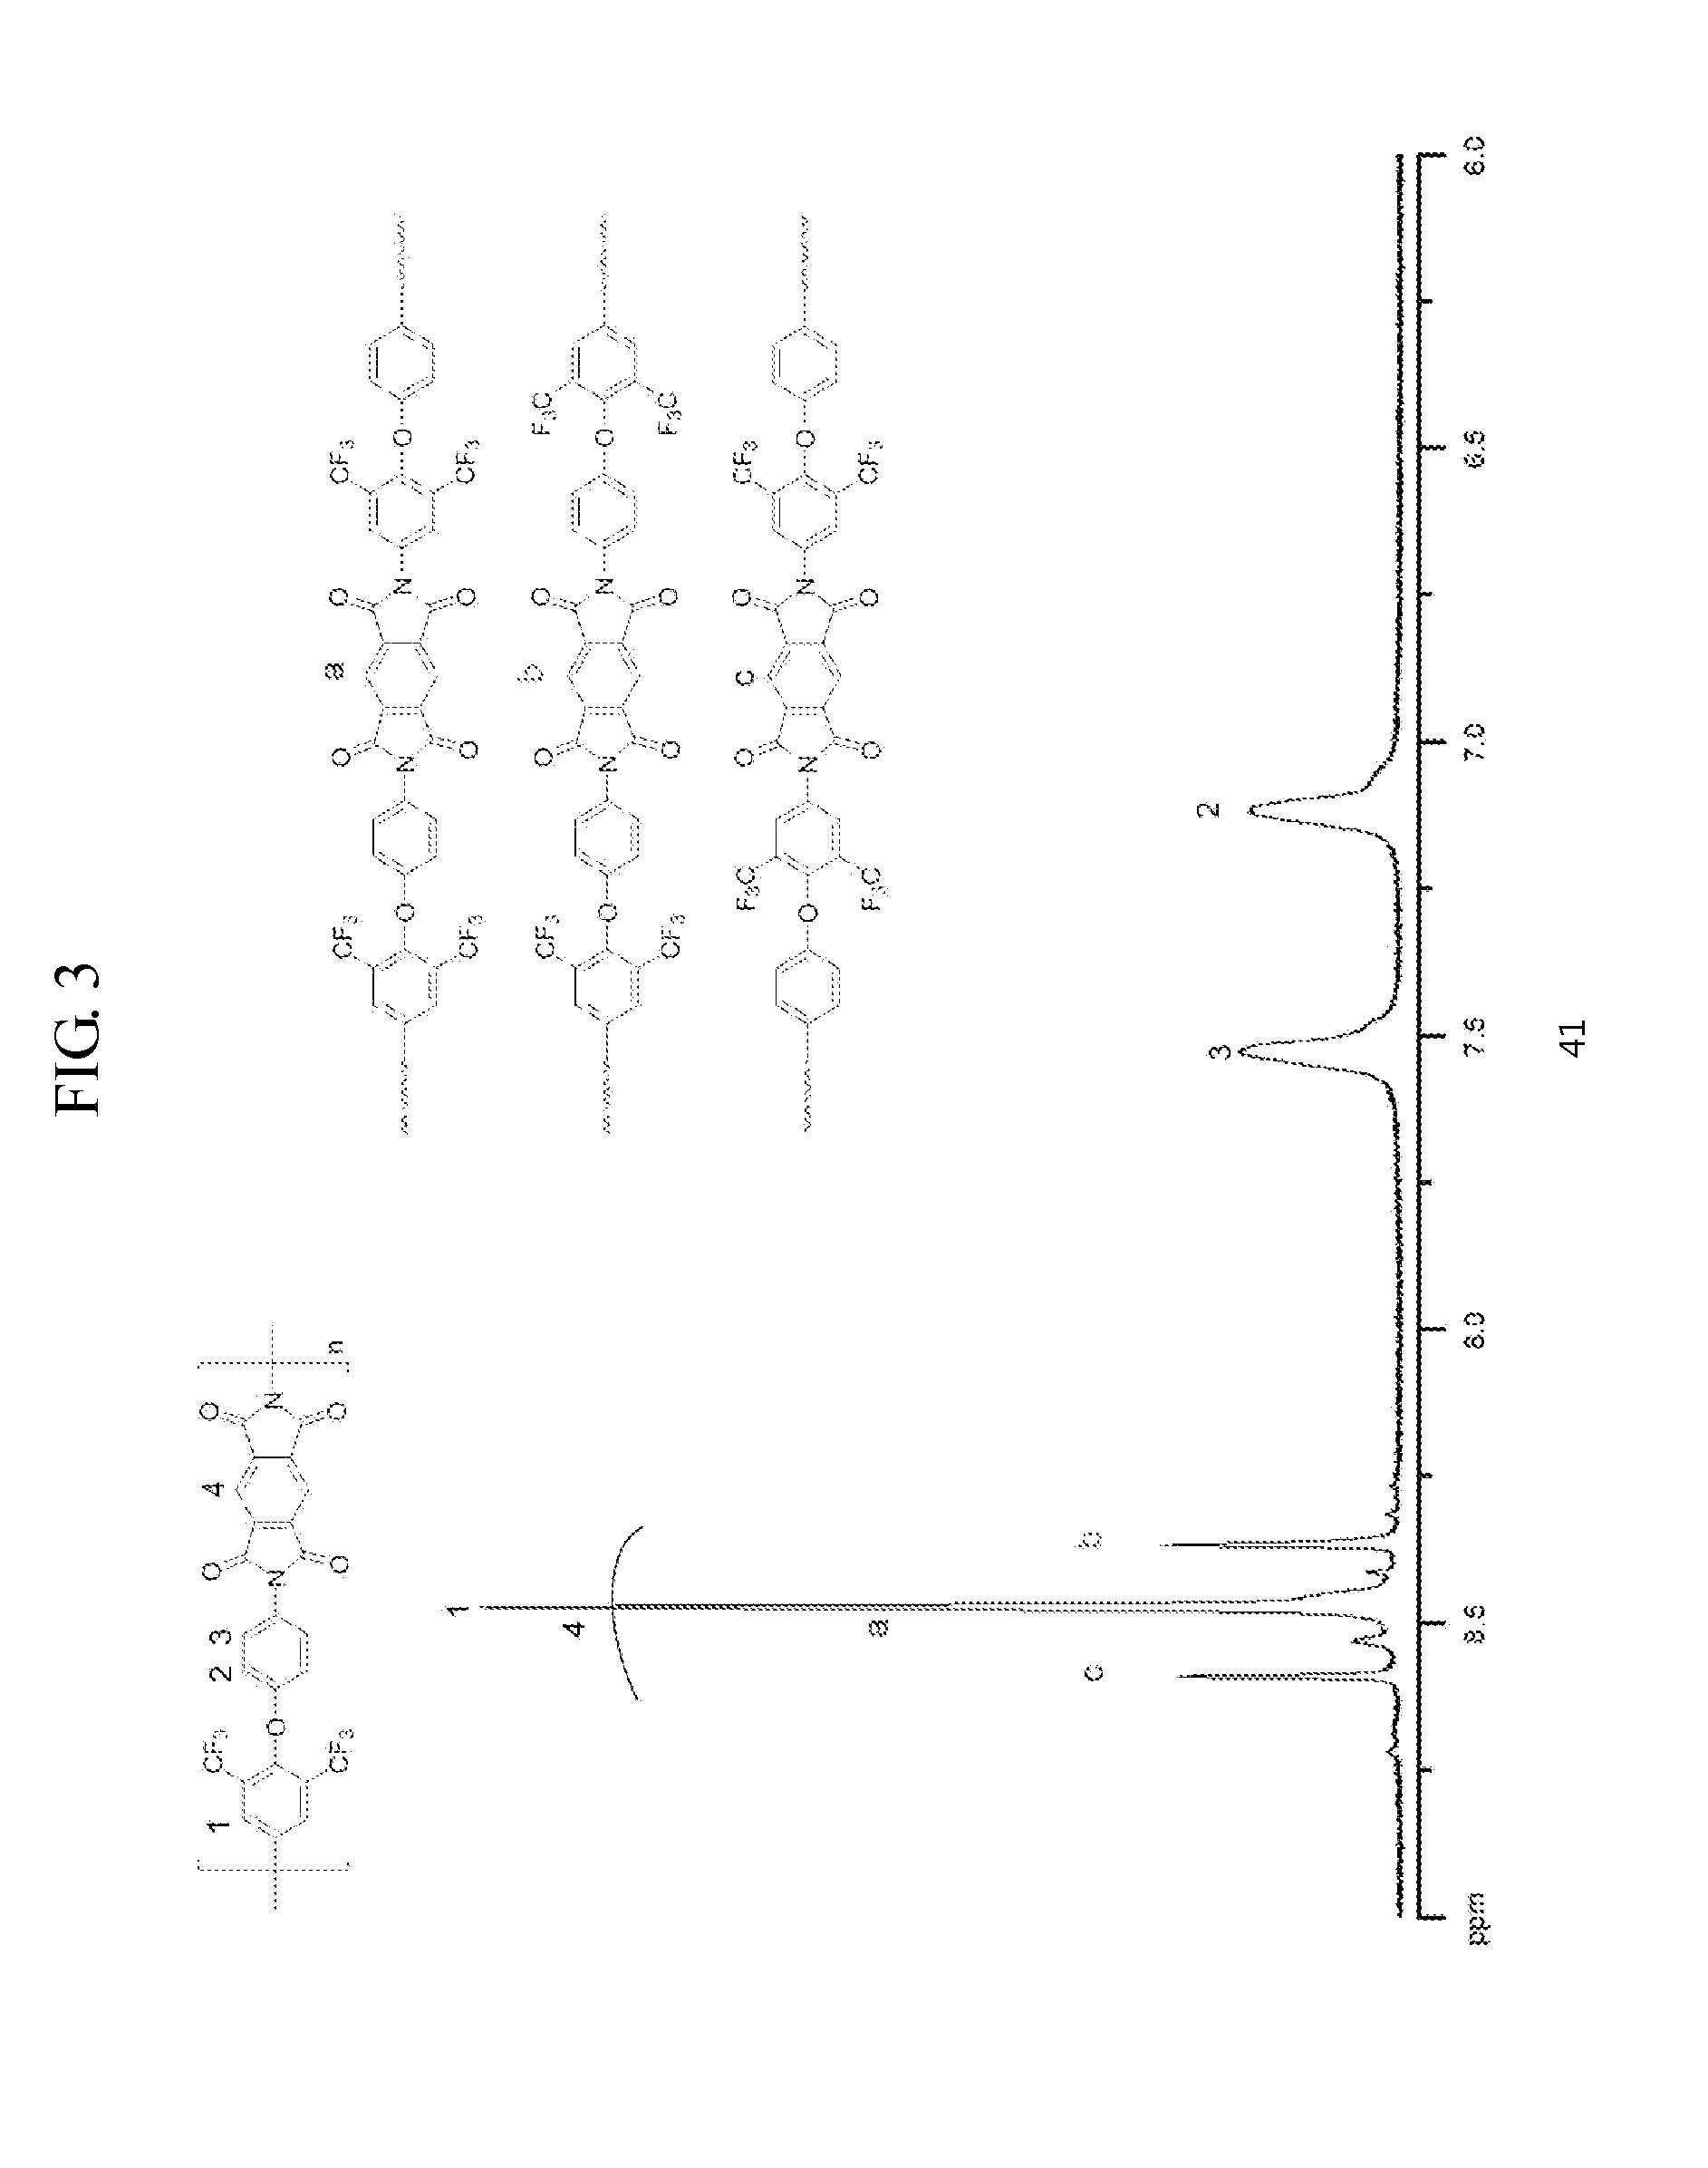 Asymmetric Diamine Compounds Containing Two Functional Groups and Polymers Therefrom